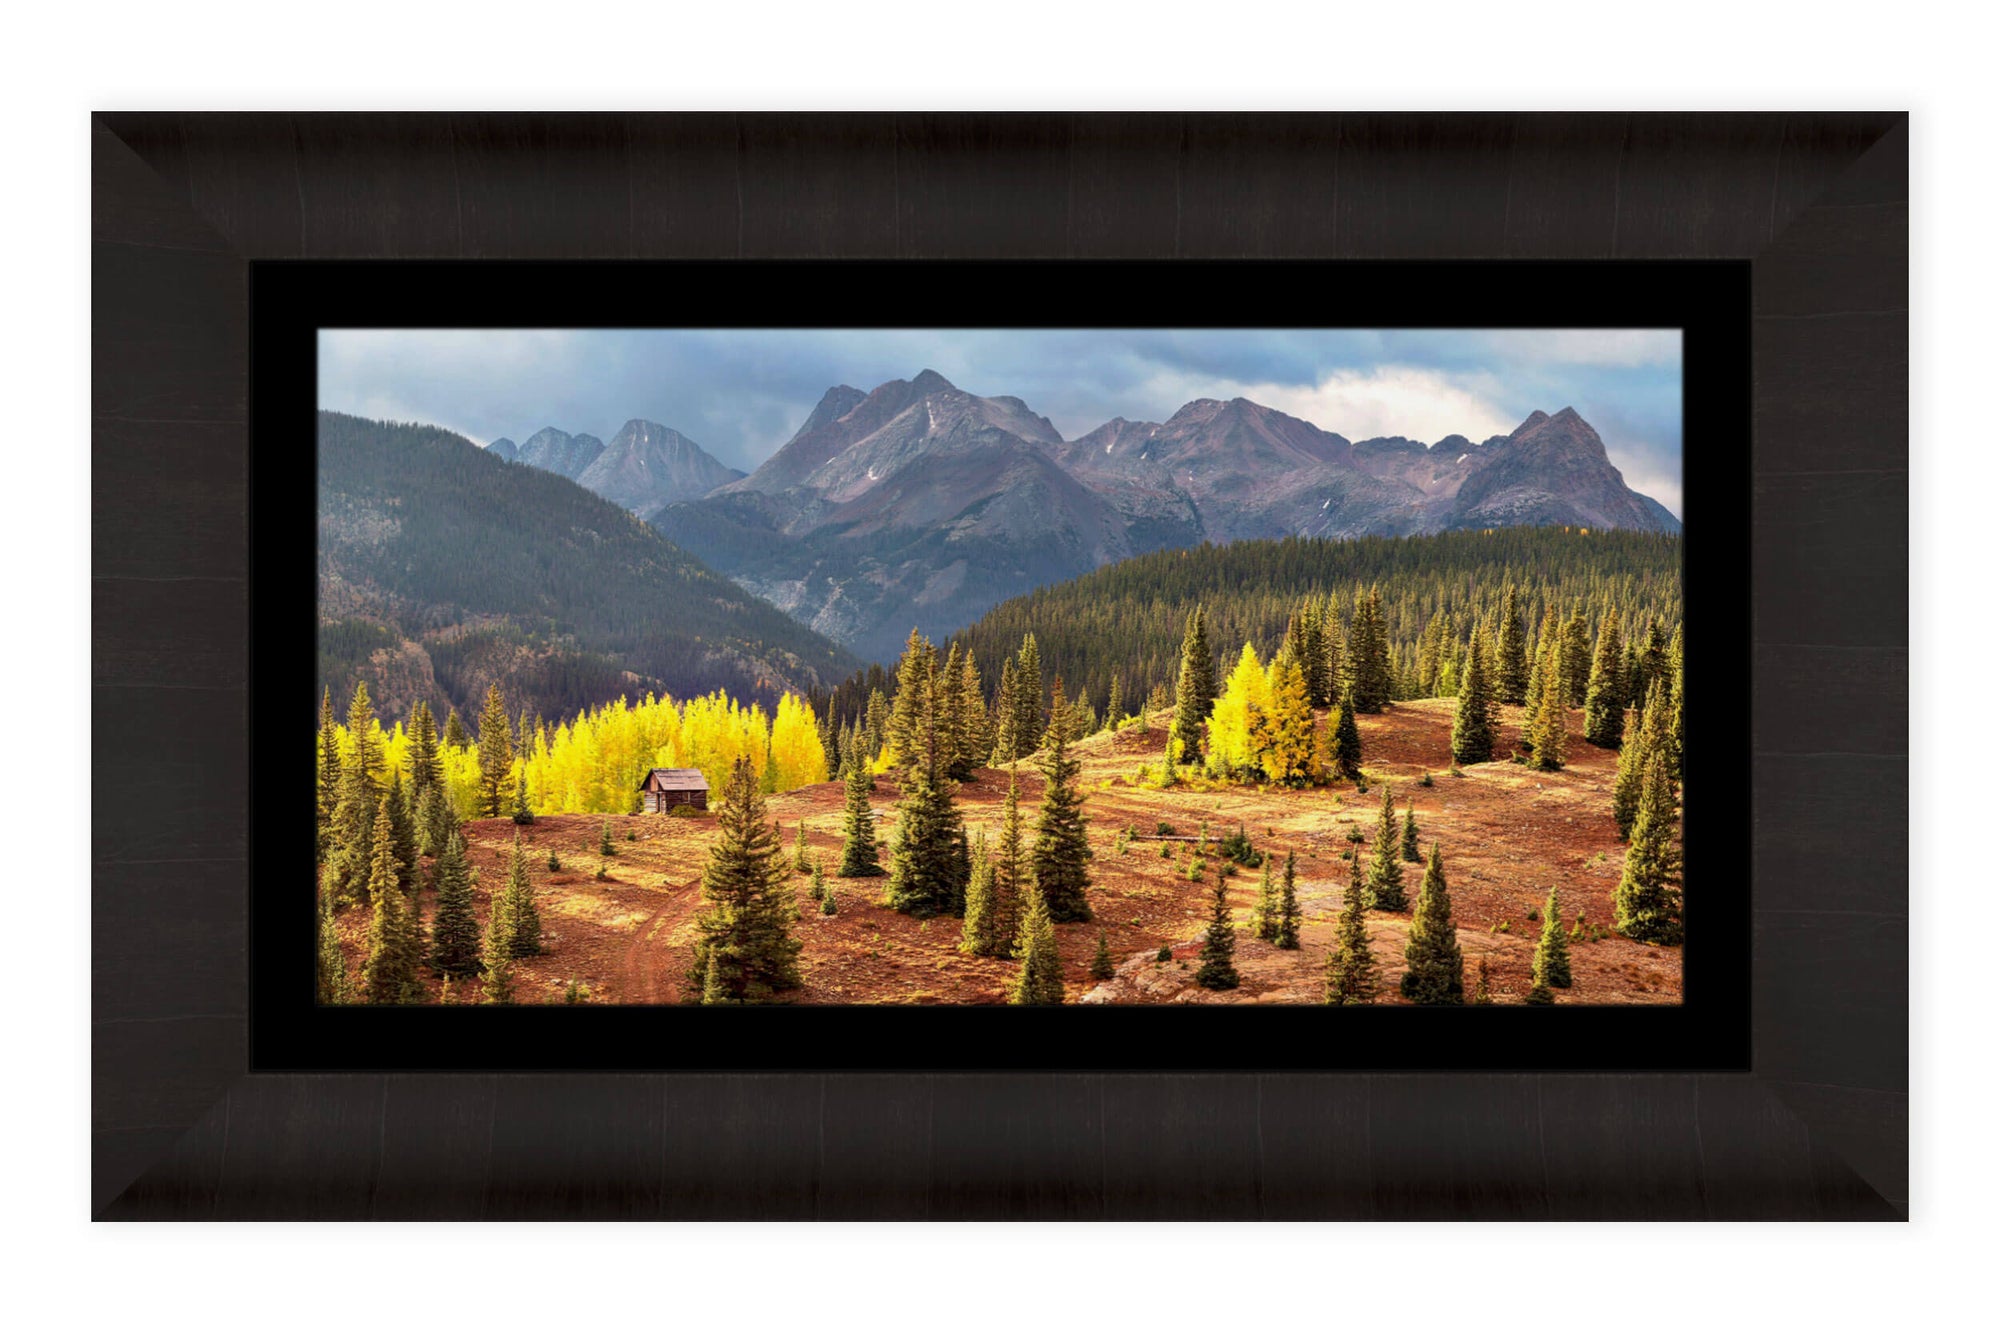 A framed cabin picture from Molas Pass near Silverton during peak Colorado fall.